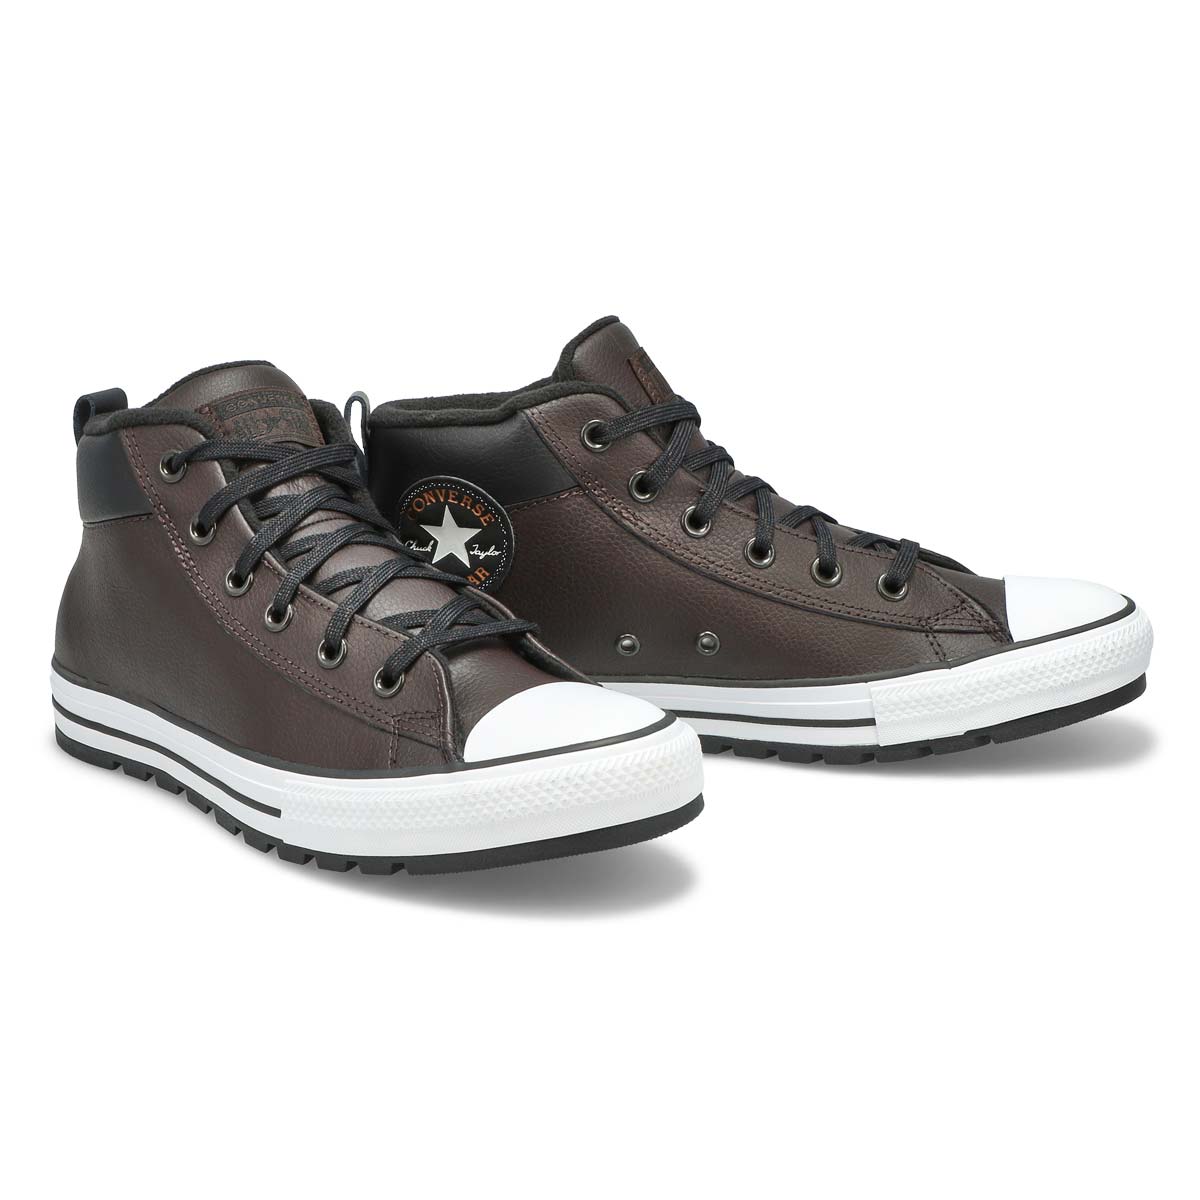 Botte doublée ALL STAR STREET LINED, hommes